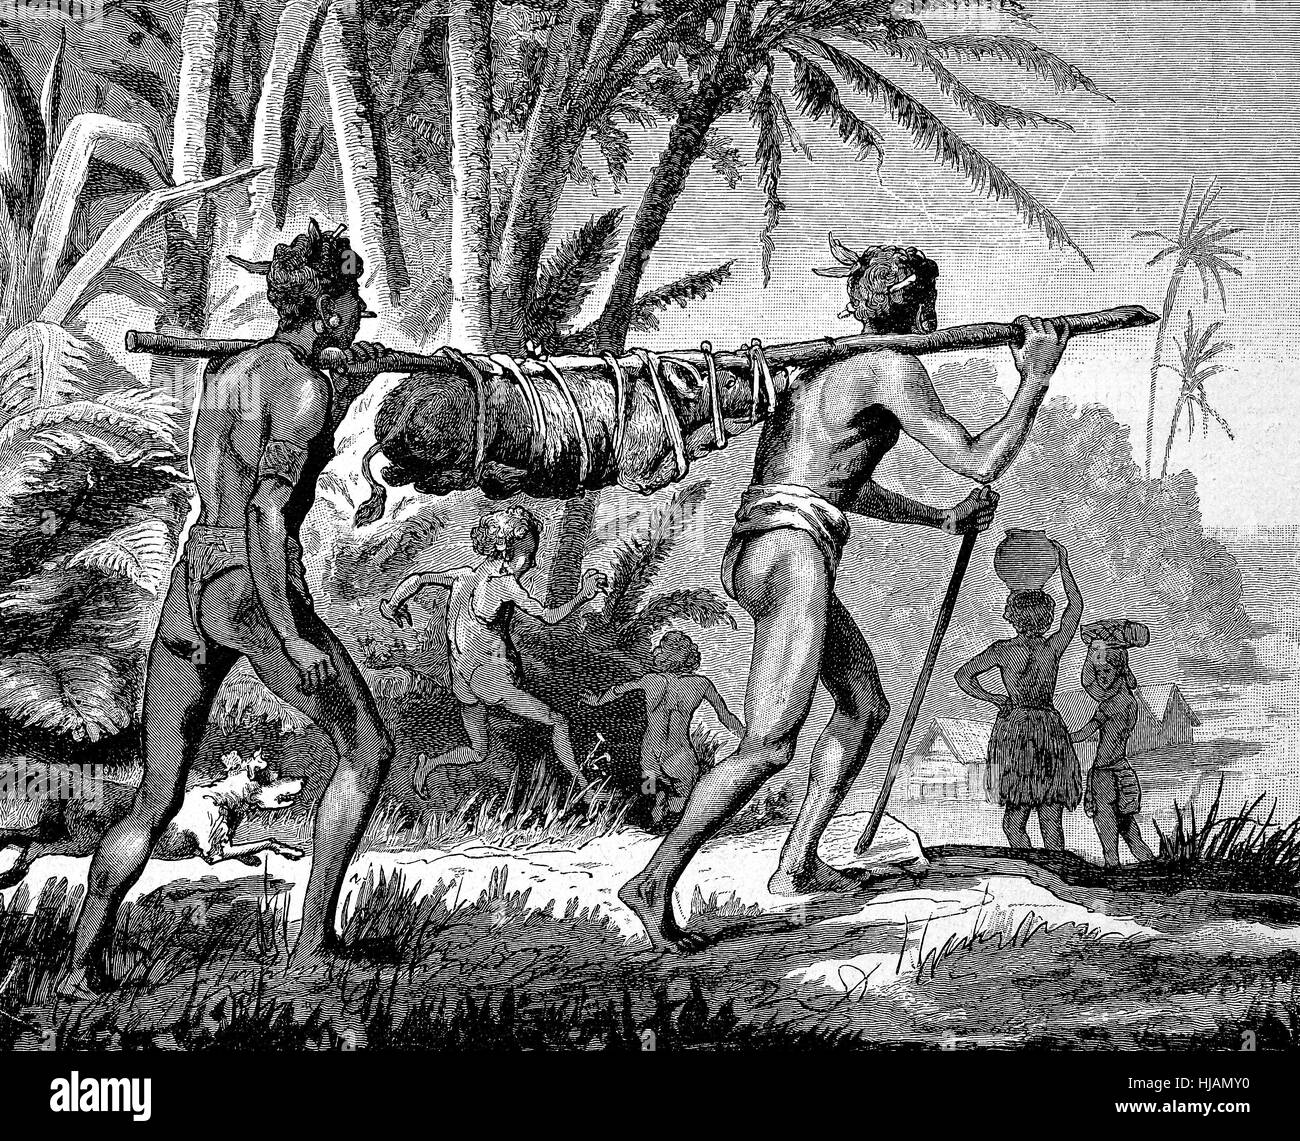 Transport of a living pig, to the market, in New Guinea, agriculture, natives, historical image or illustration from the year 1894, digital improved Stock Photo